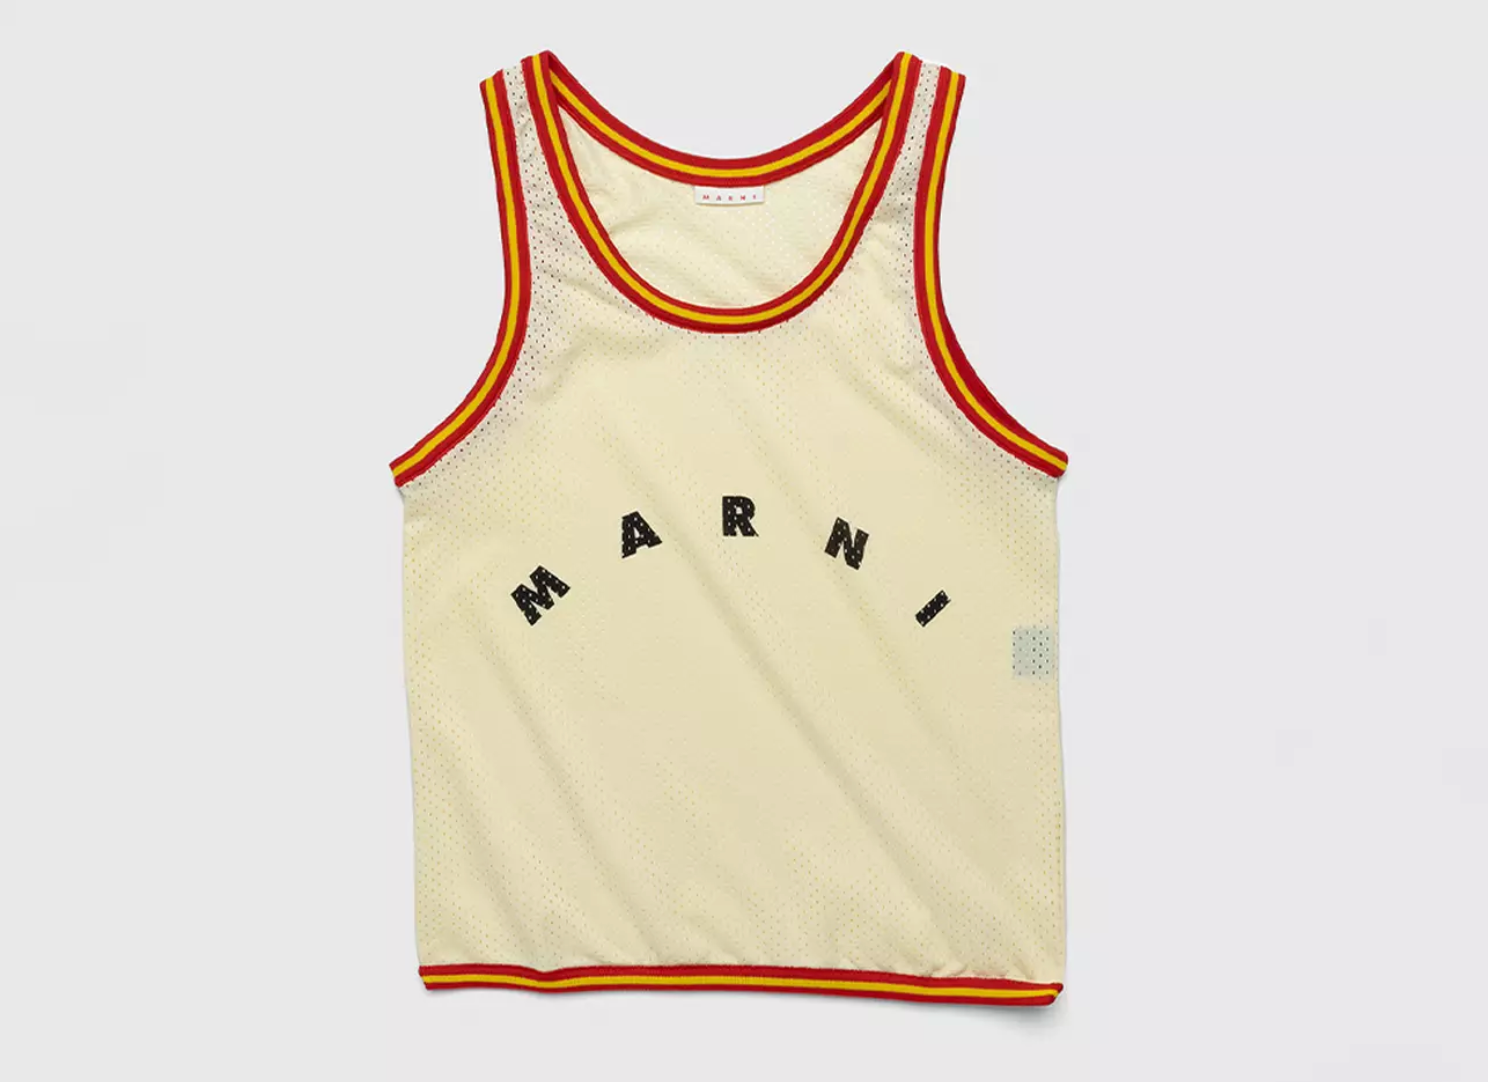 Is It a Tote Bag? Is It A Basketball Jersey? Marni's New Design Is Kinda Both